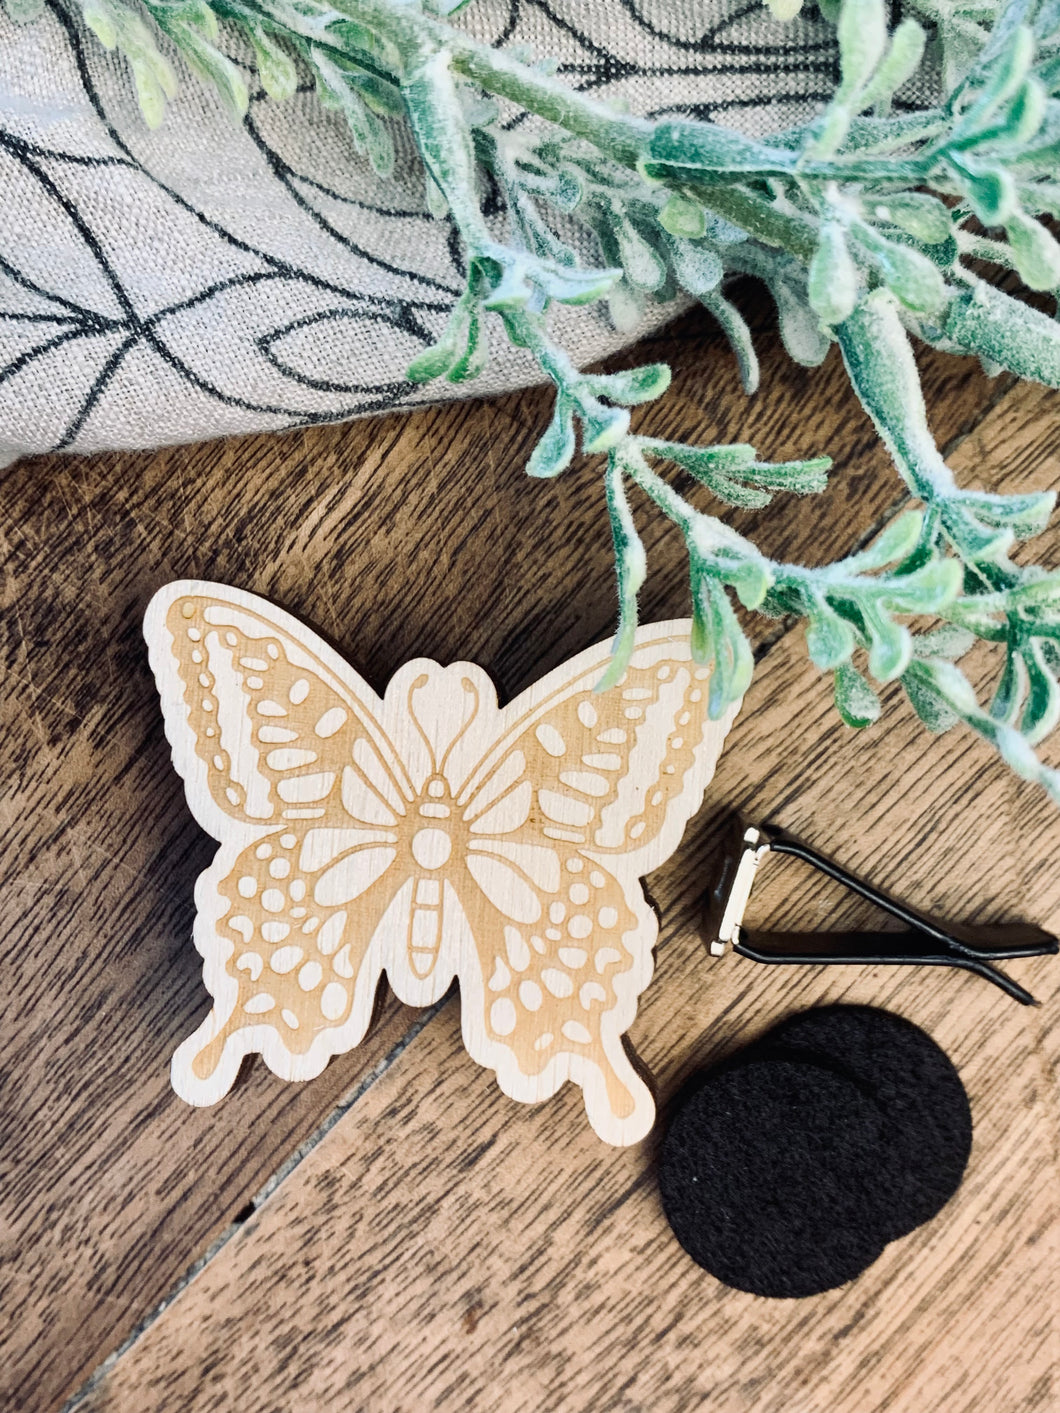 Butterfly Oil Diffuser, Car Vent Clip, Car Freshener, Air Freshener, Vehicle Accessorie